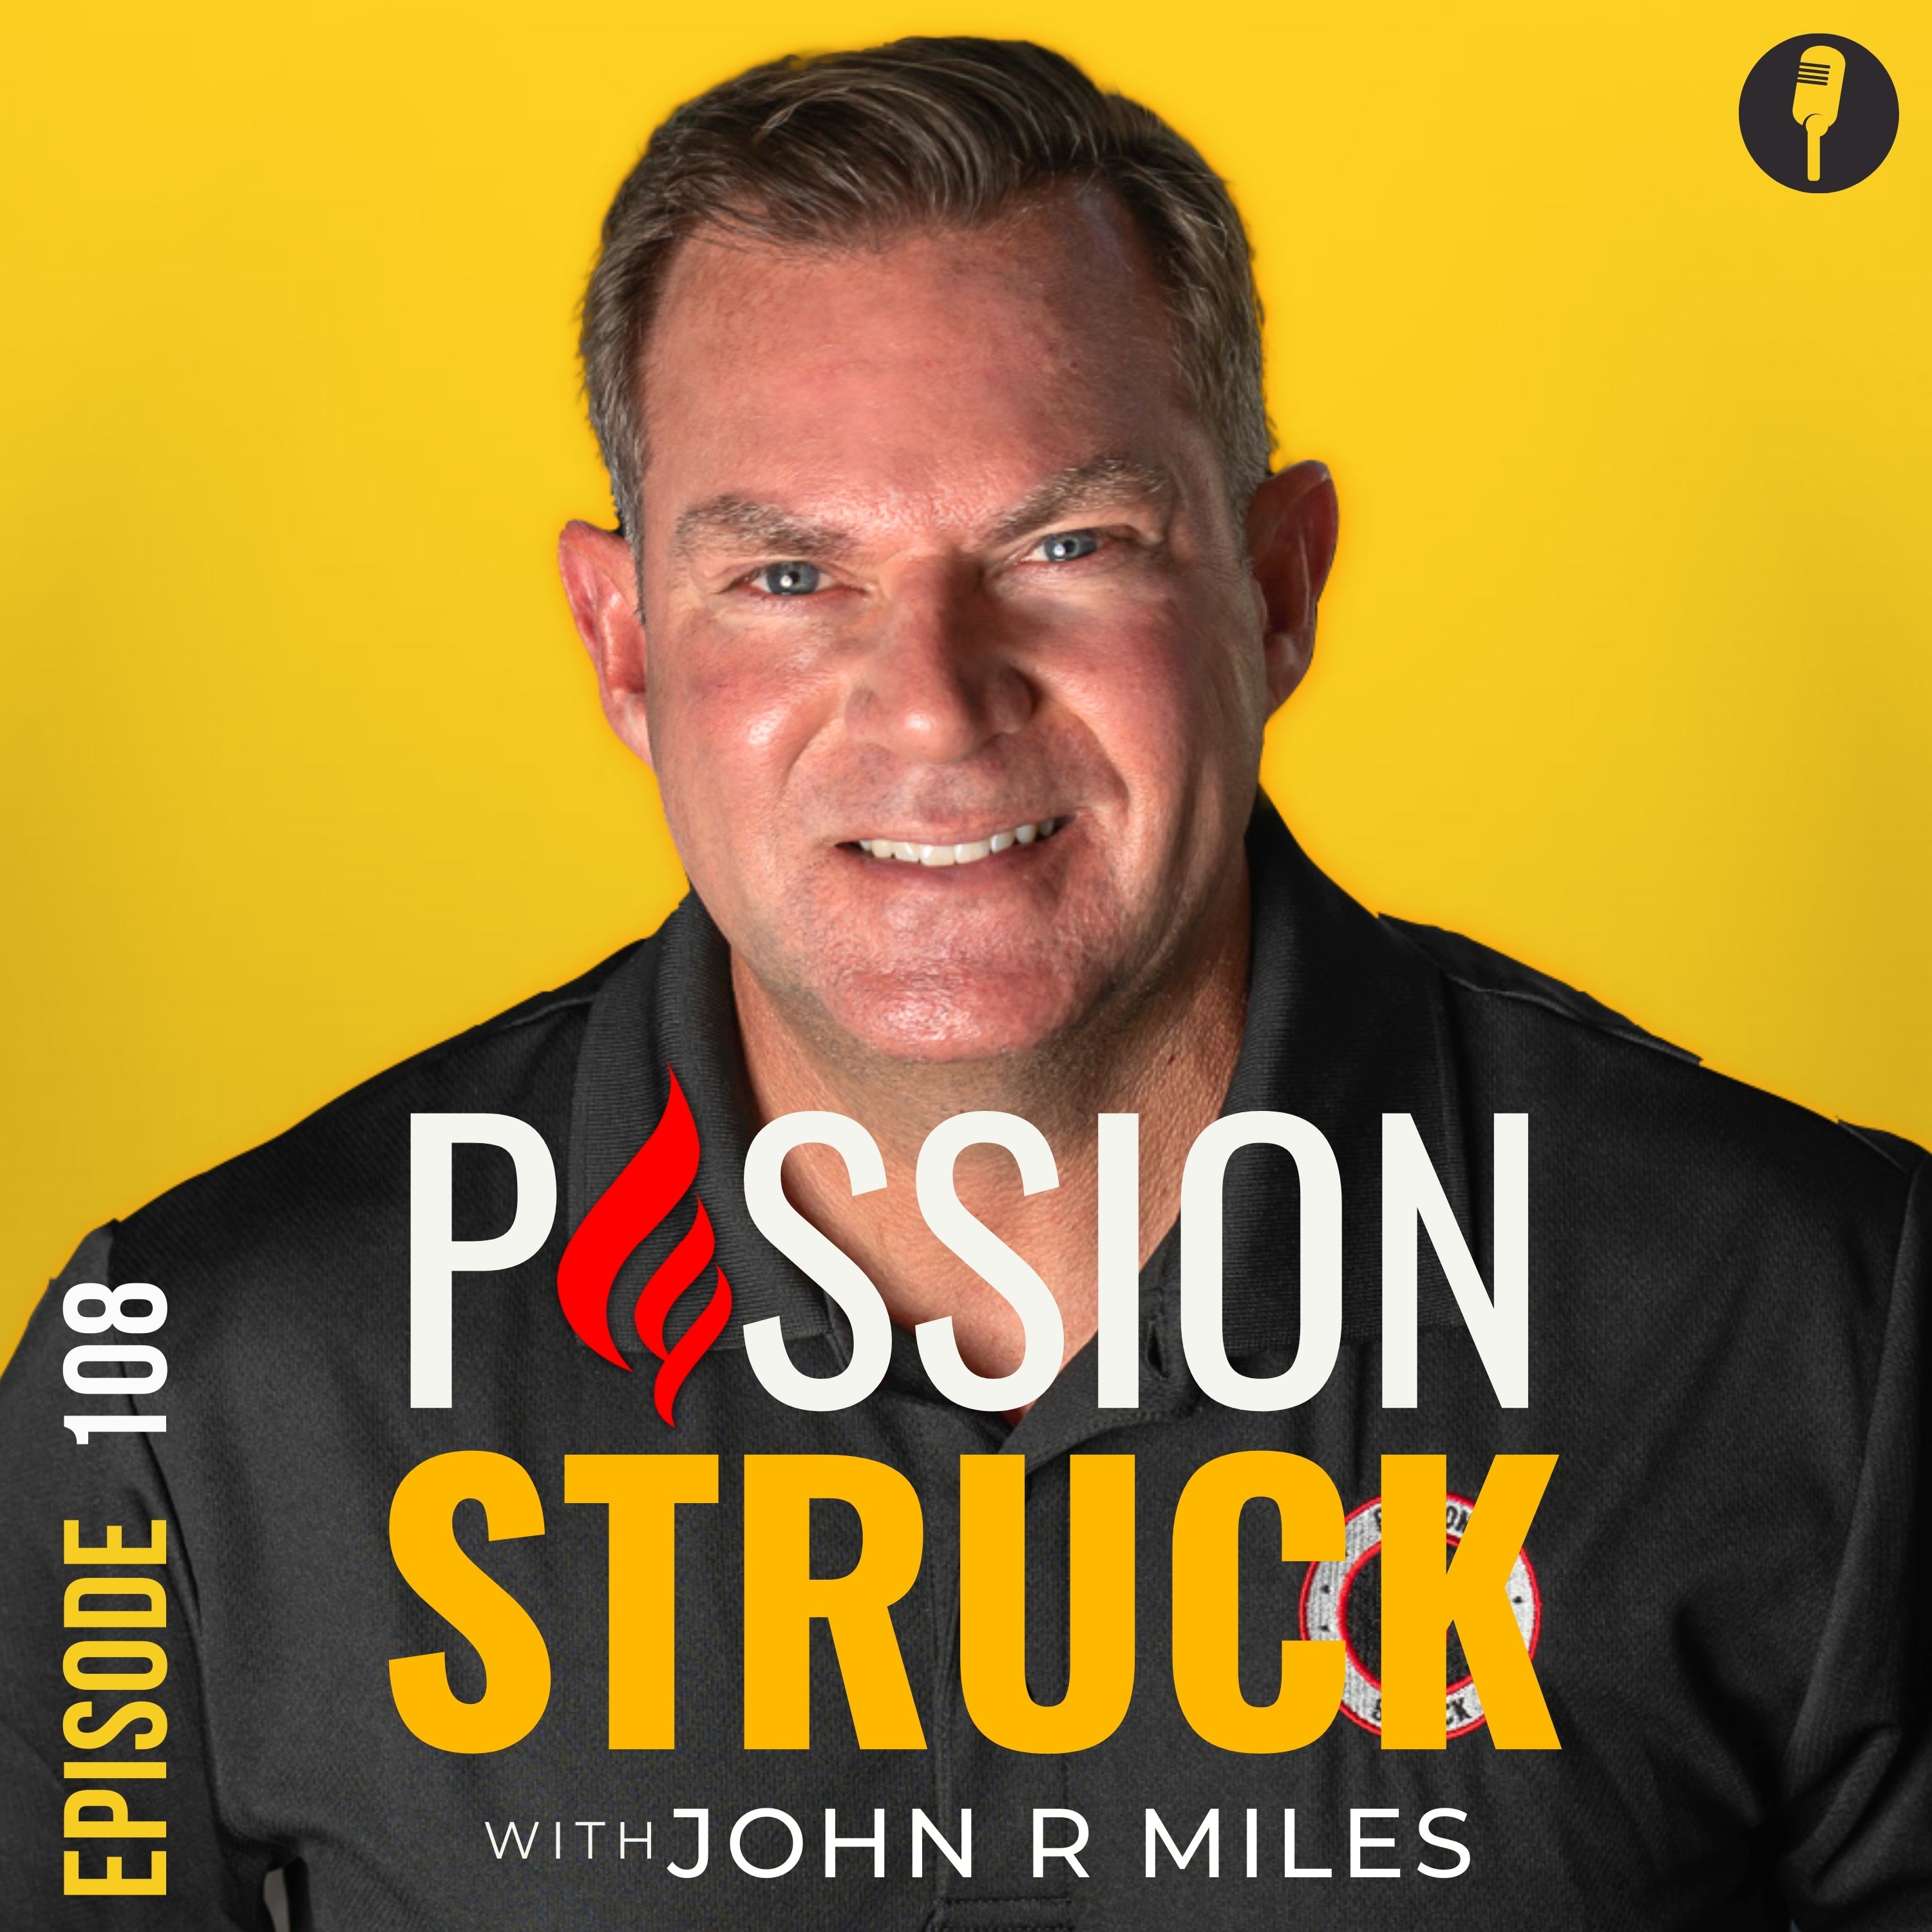 Passion Struck podcast episode 108 album cover with John R. Miles